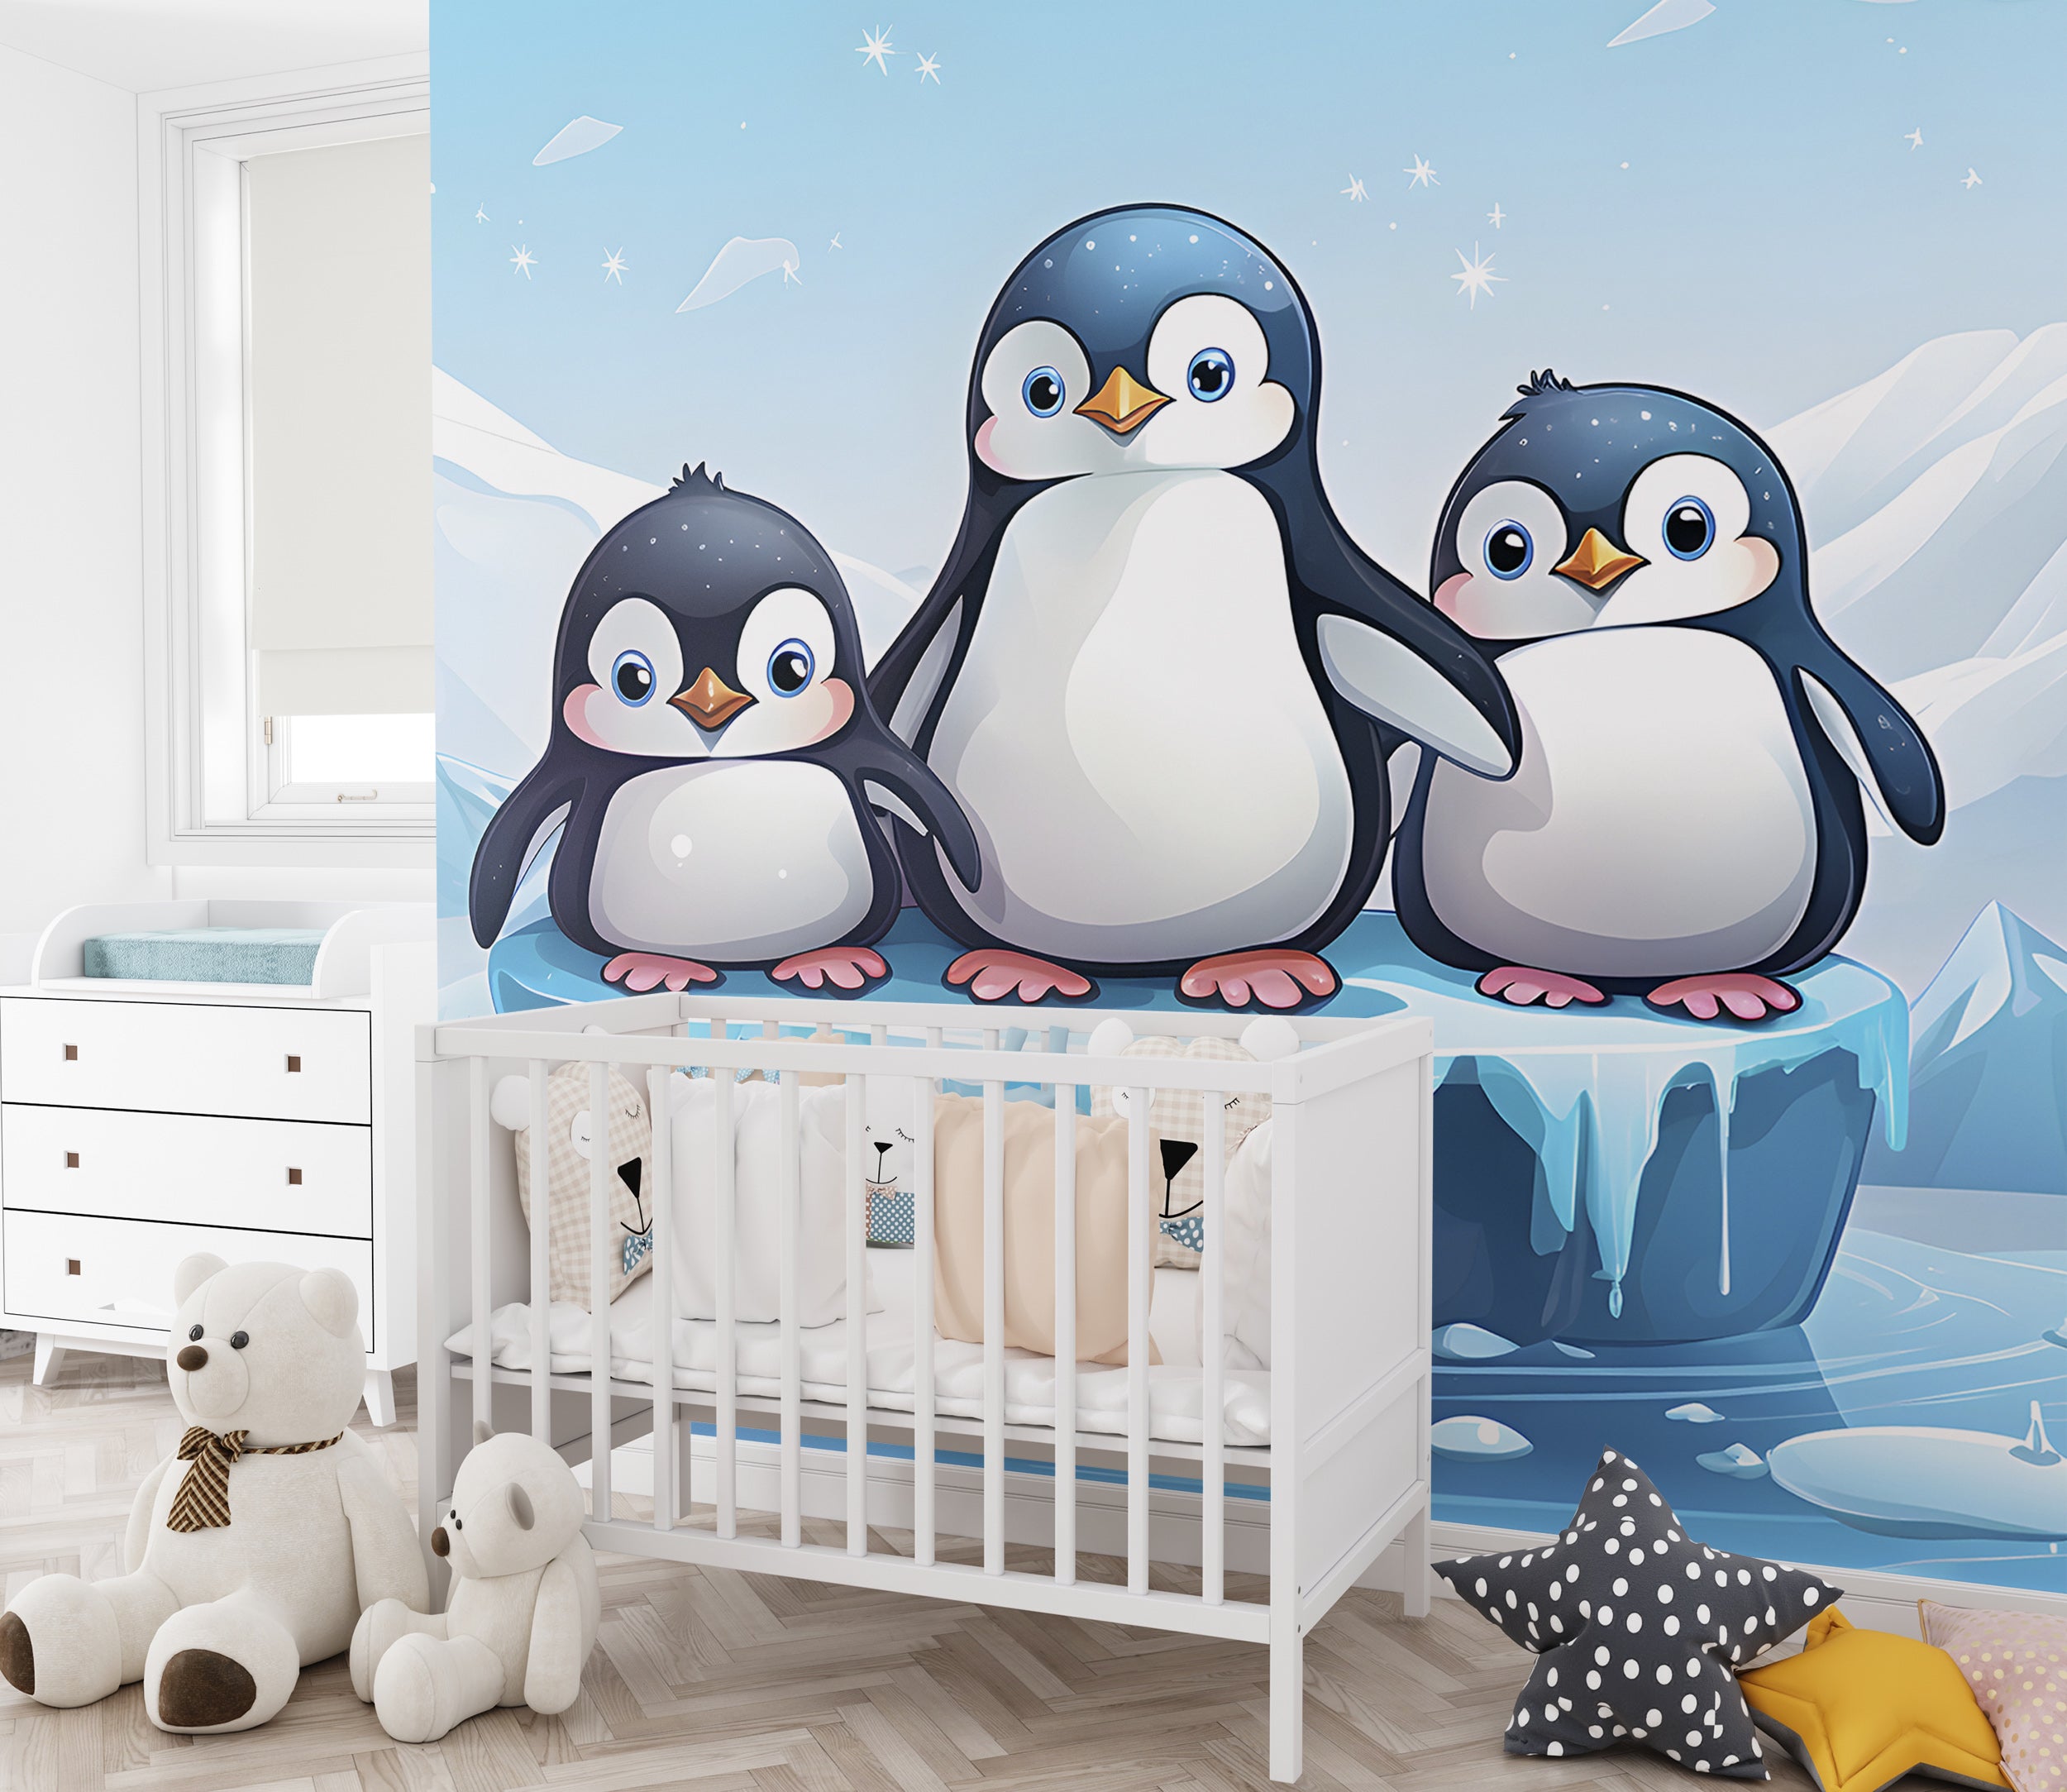 Create a Playful Space with Penguins